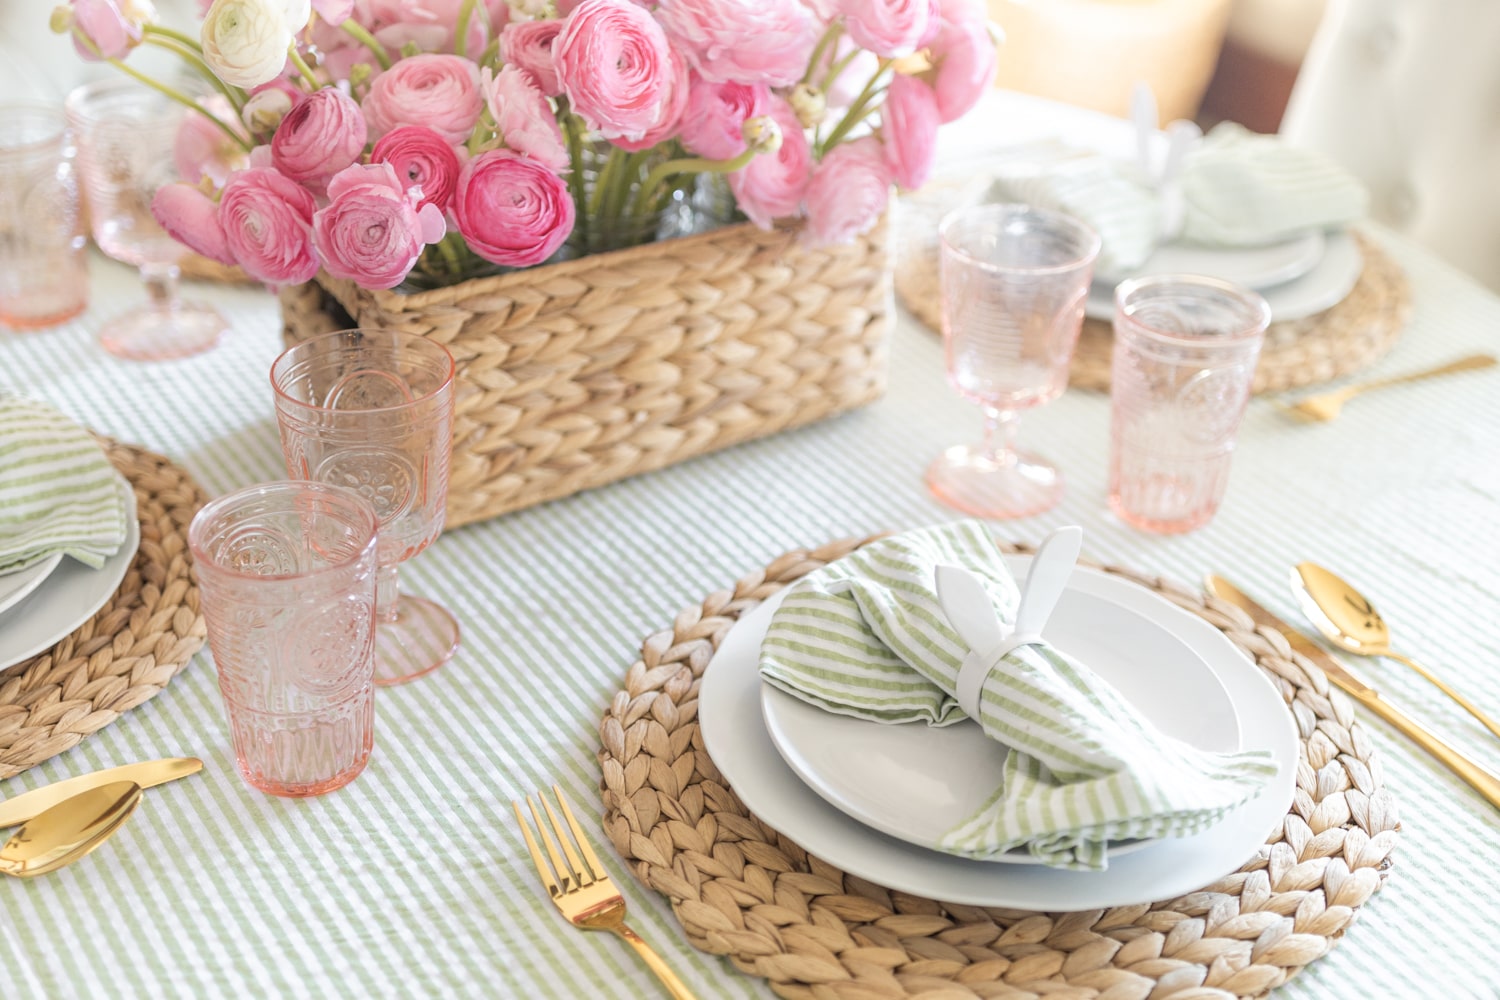 Green and pink Easter table setting ideas from blogger Stephanie Ziajka on Diary of a Debutante